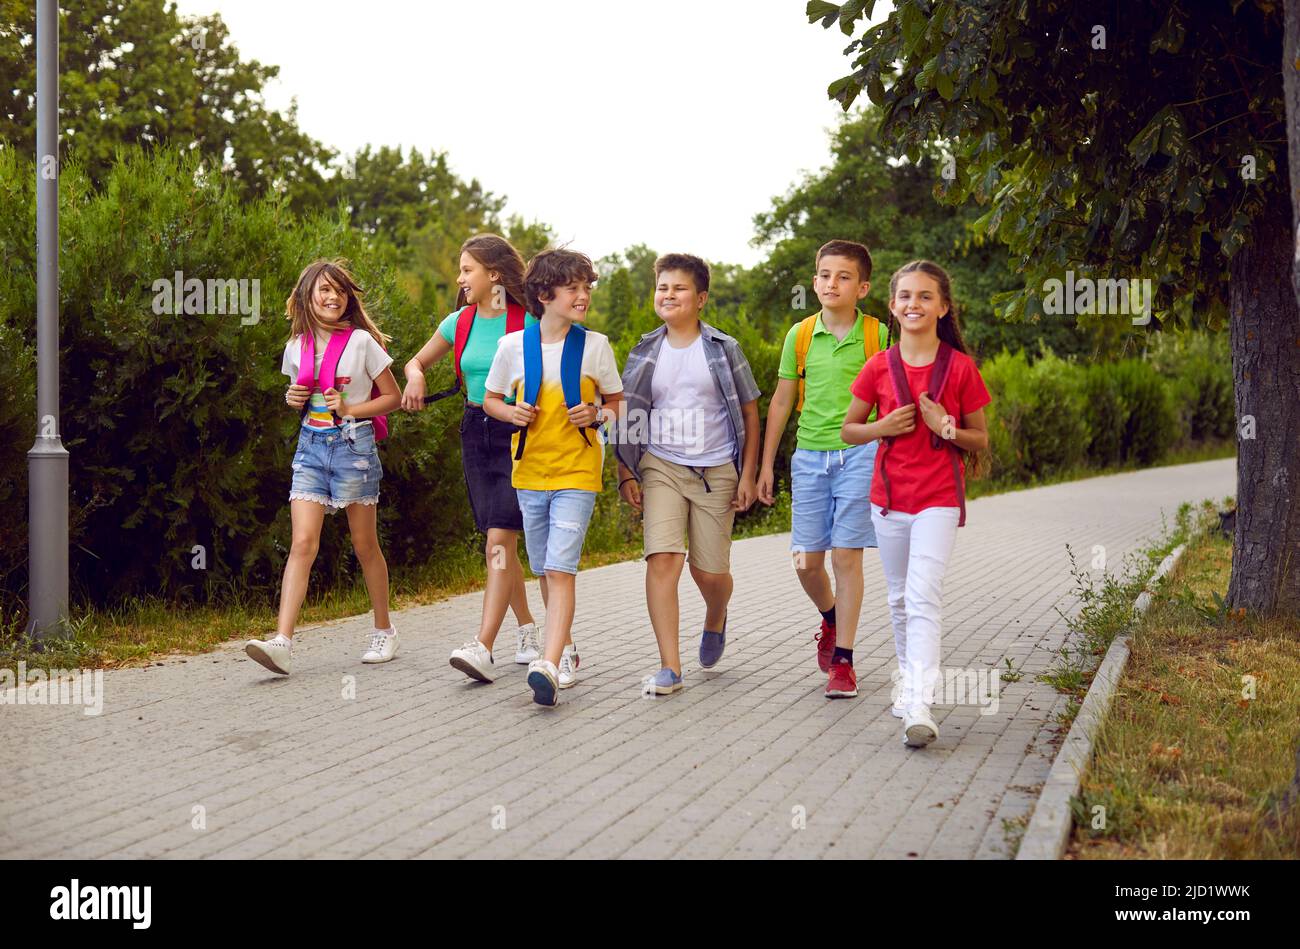 Funny schoolchildren group with backpacks have fun walking together on path in park. Stock Photo